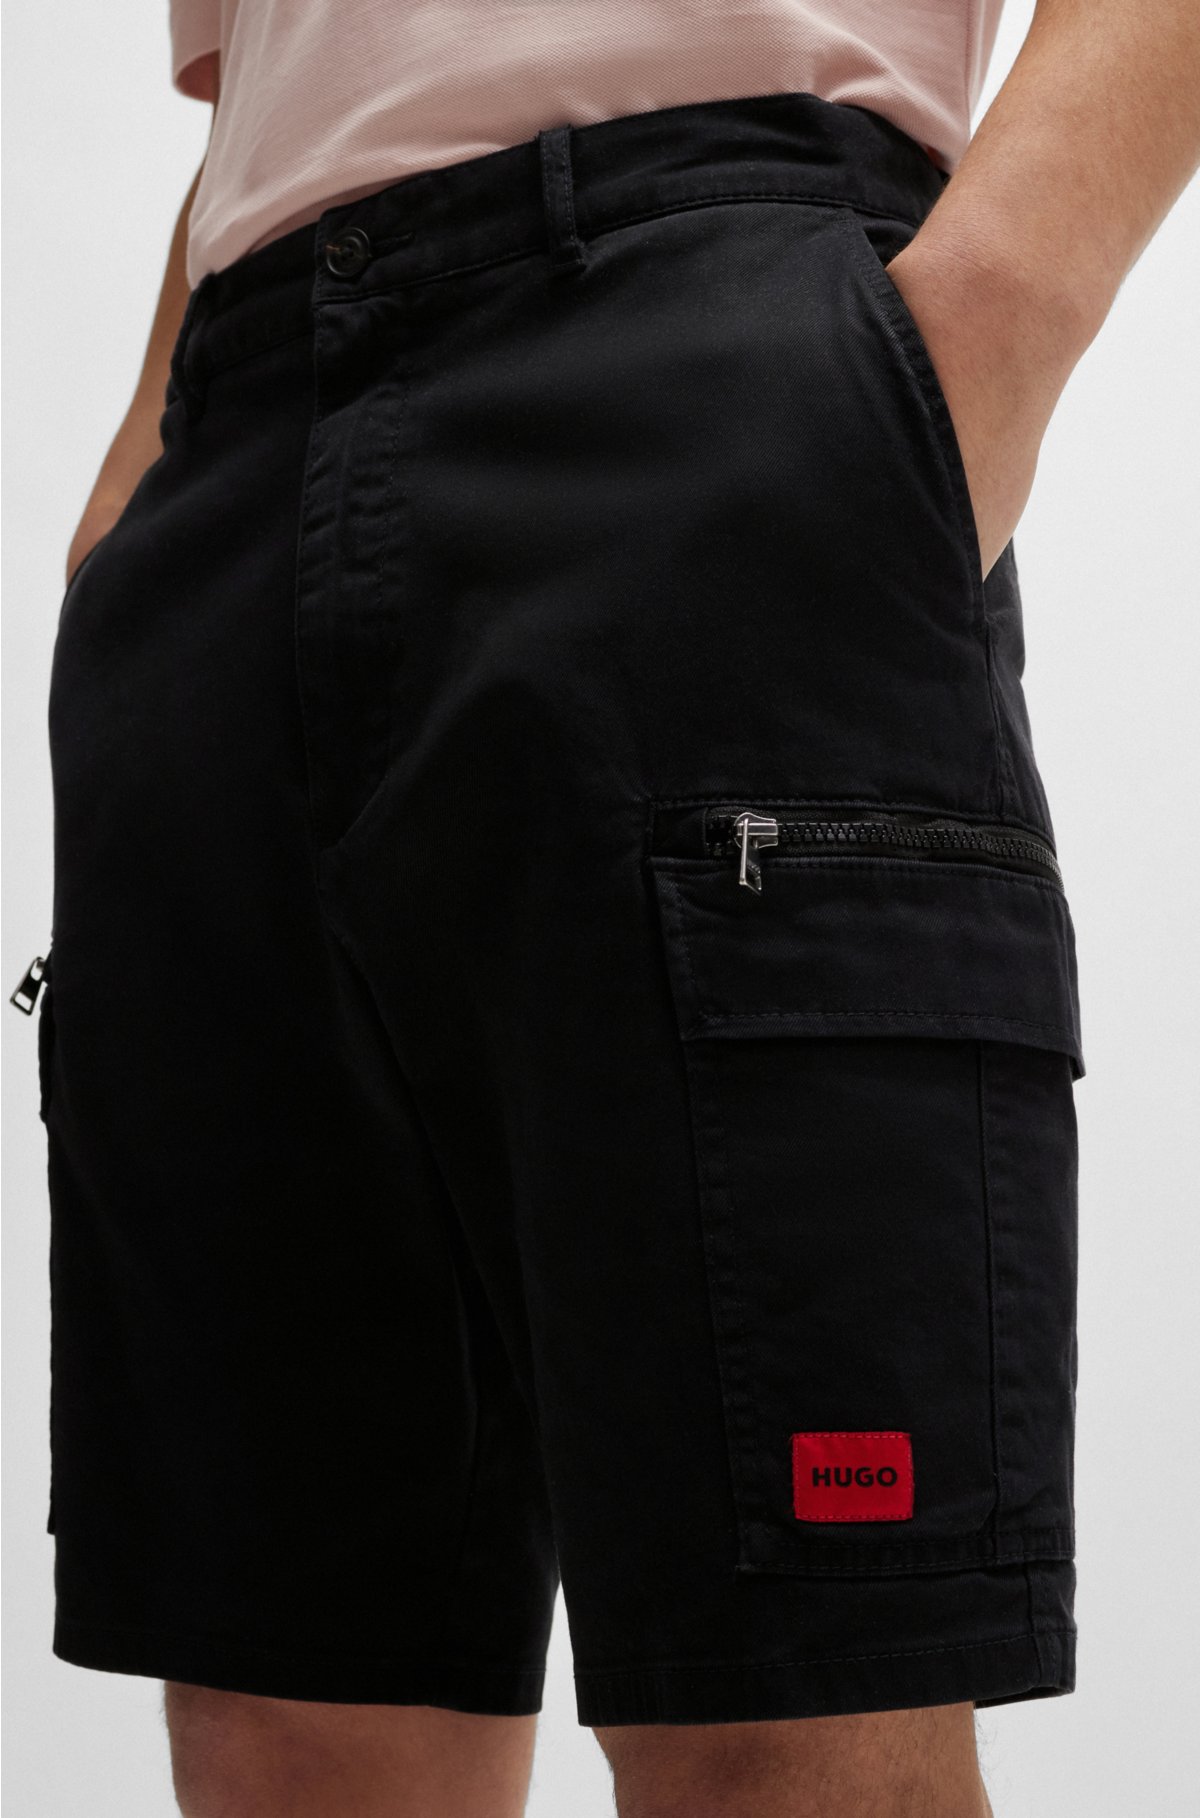 Stretch-cotton shorts with red logo label, Black